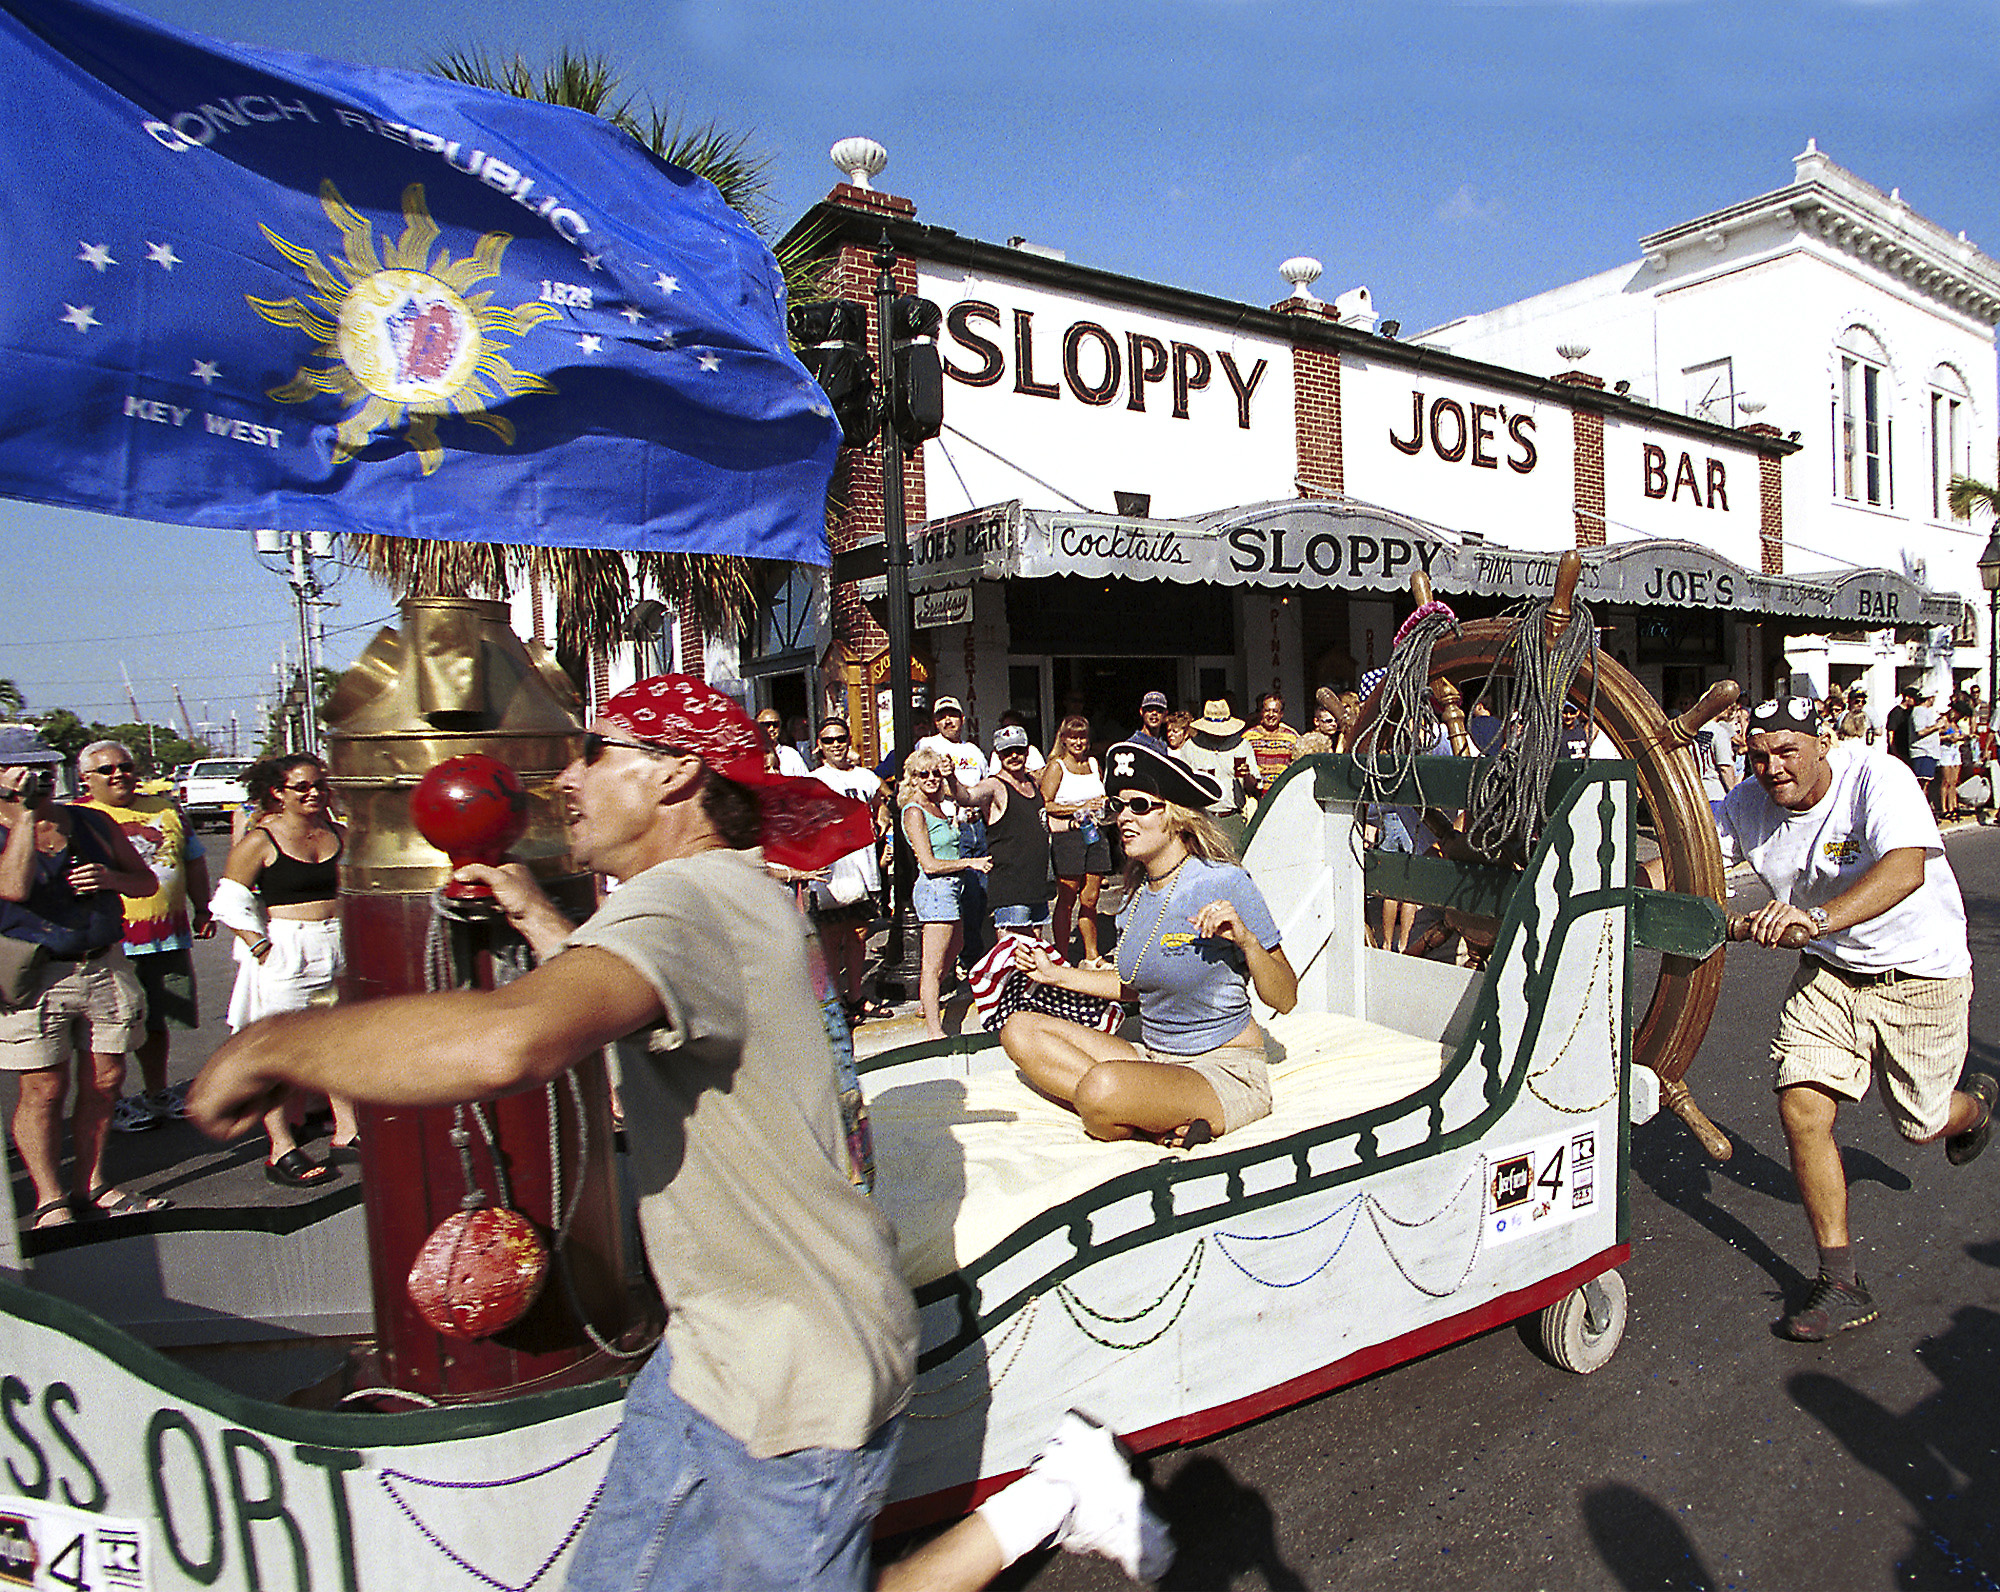 Florida Keys’ Conch Republic to Celebrate 40th ‘Birthday’ this month